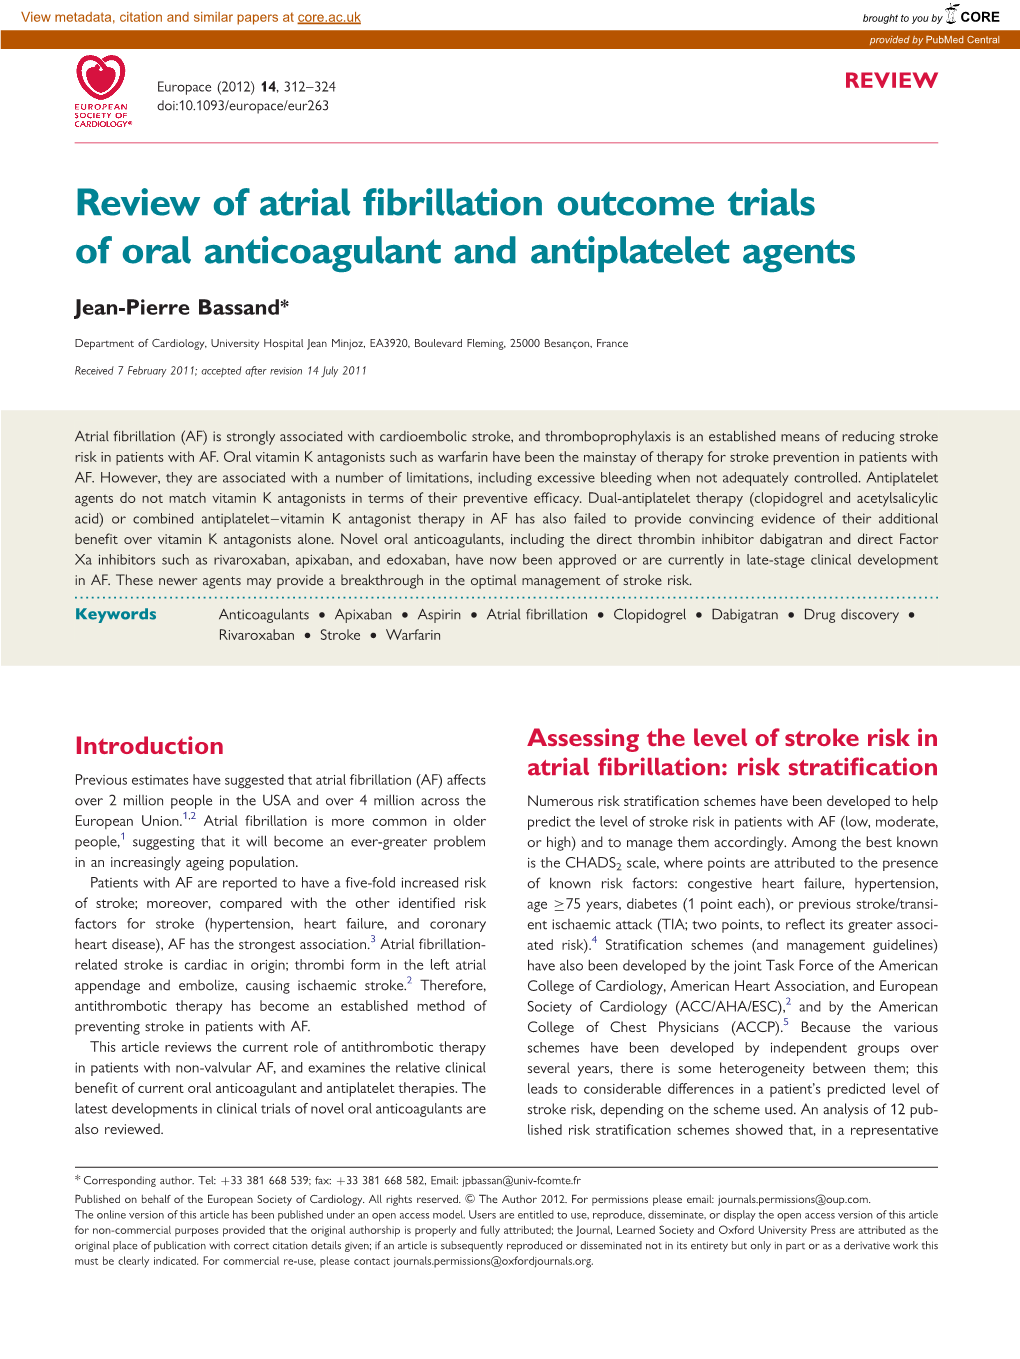 Review of Atrial Fibrillation Outcome Trials of Oral Anticoagulant And